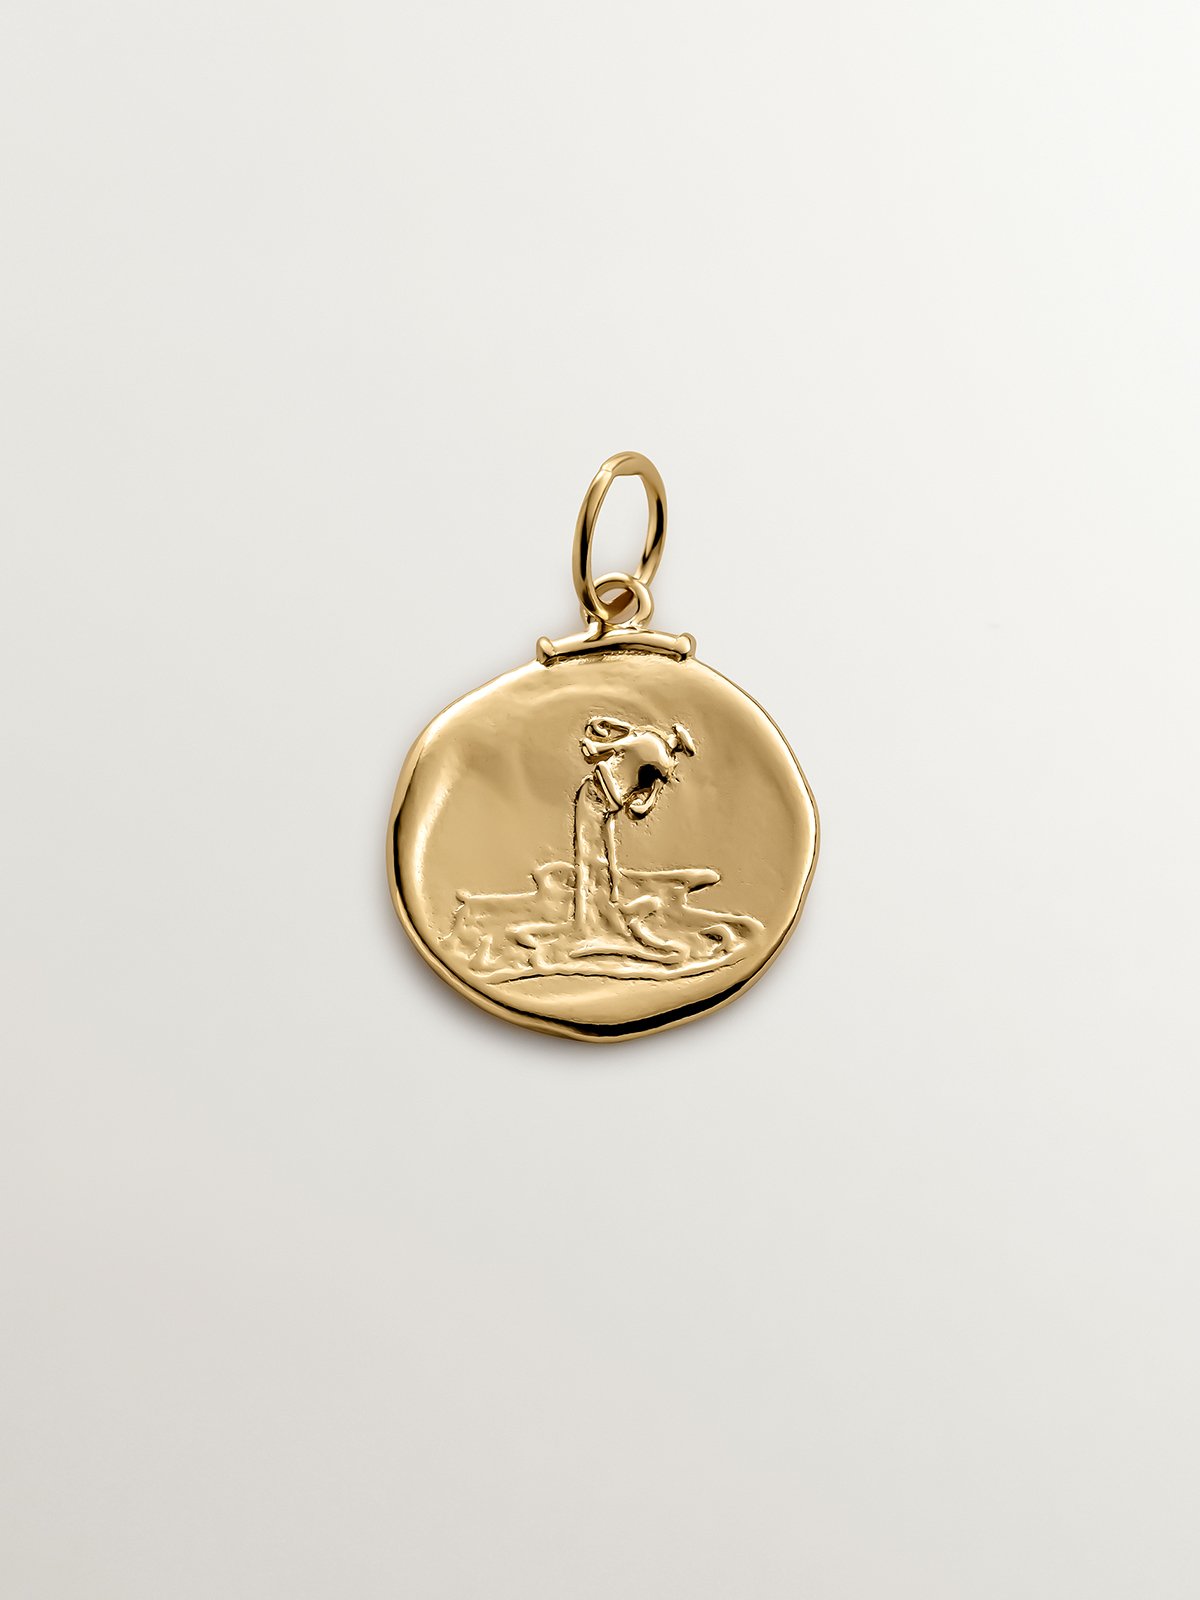 925 Silver Aquarius Charm Coated in 18K Yellow Gold